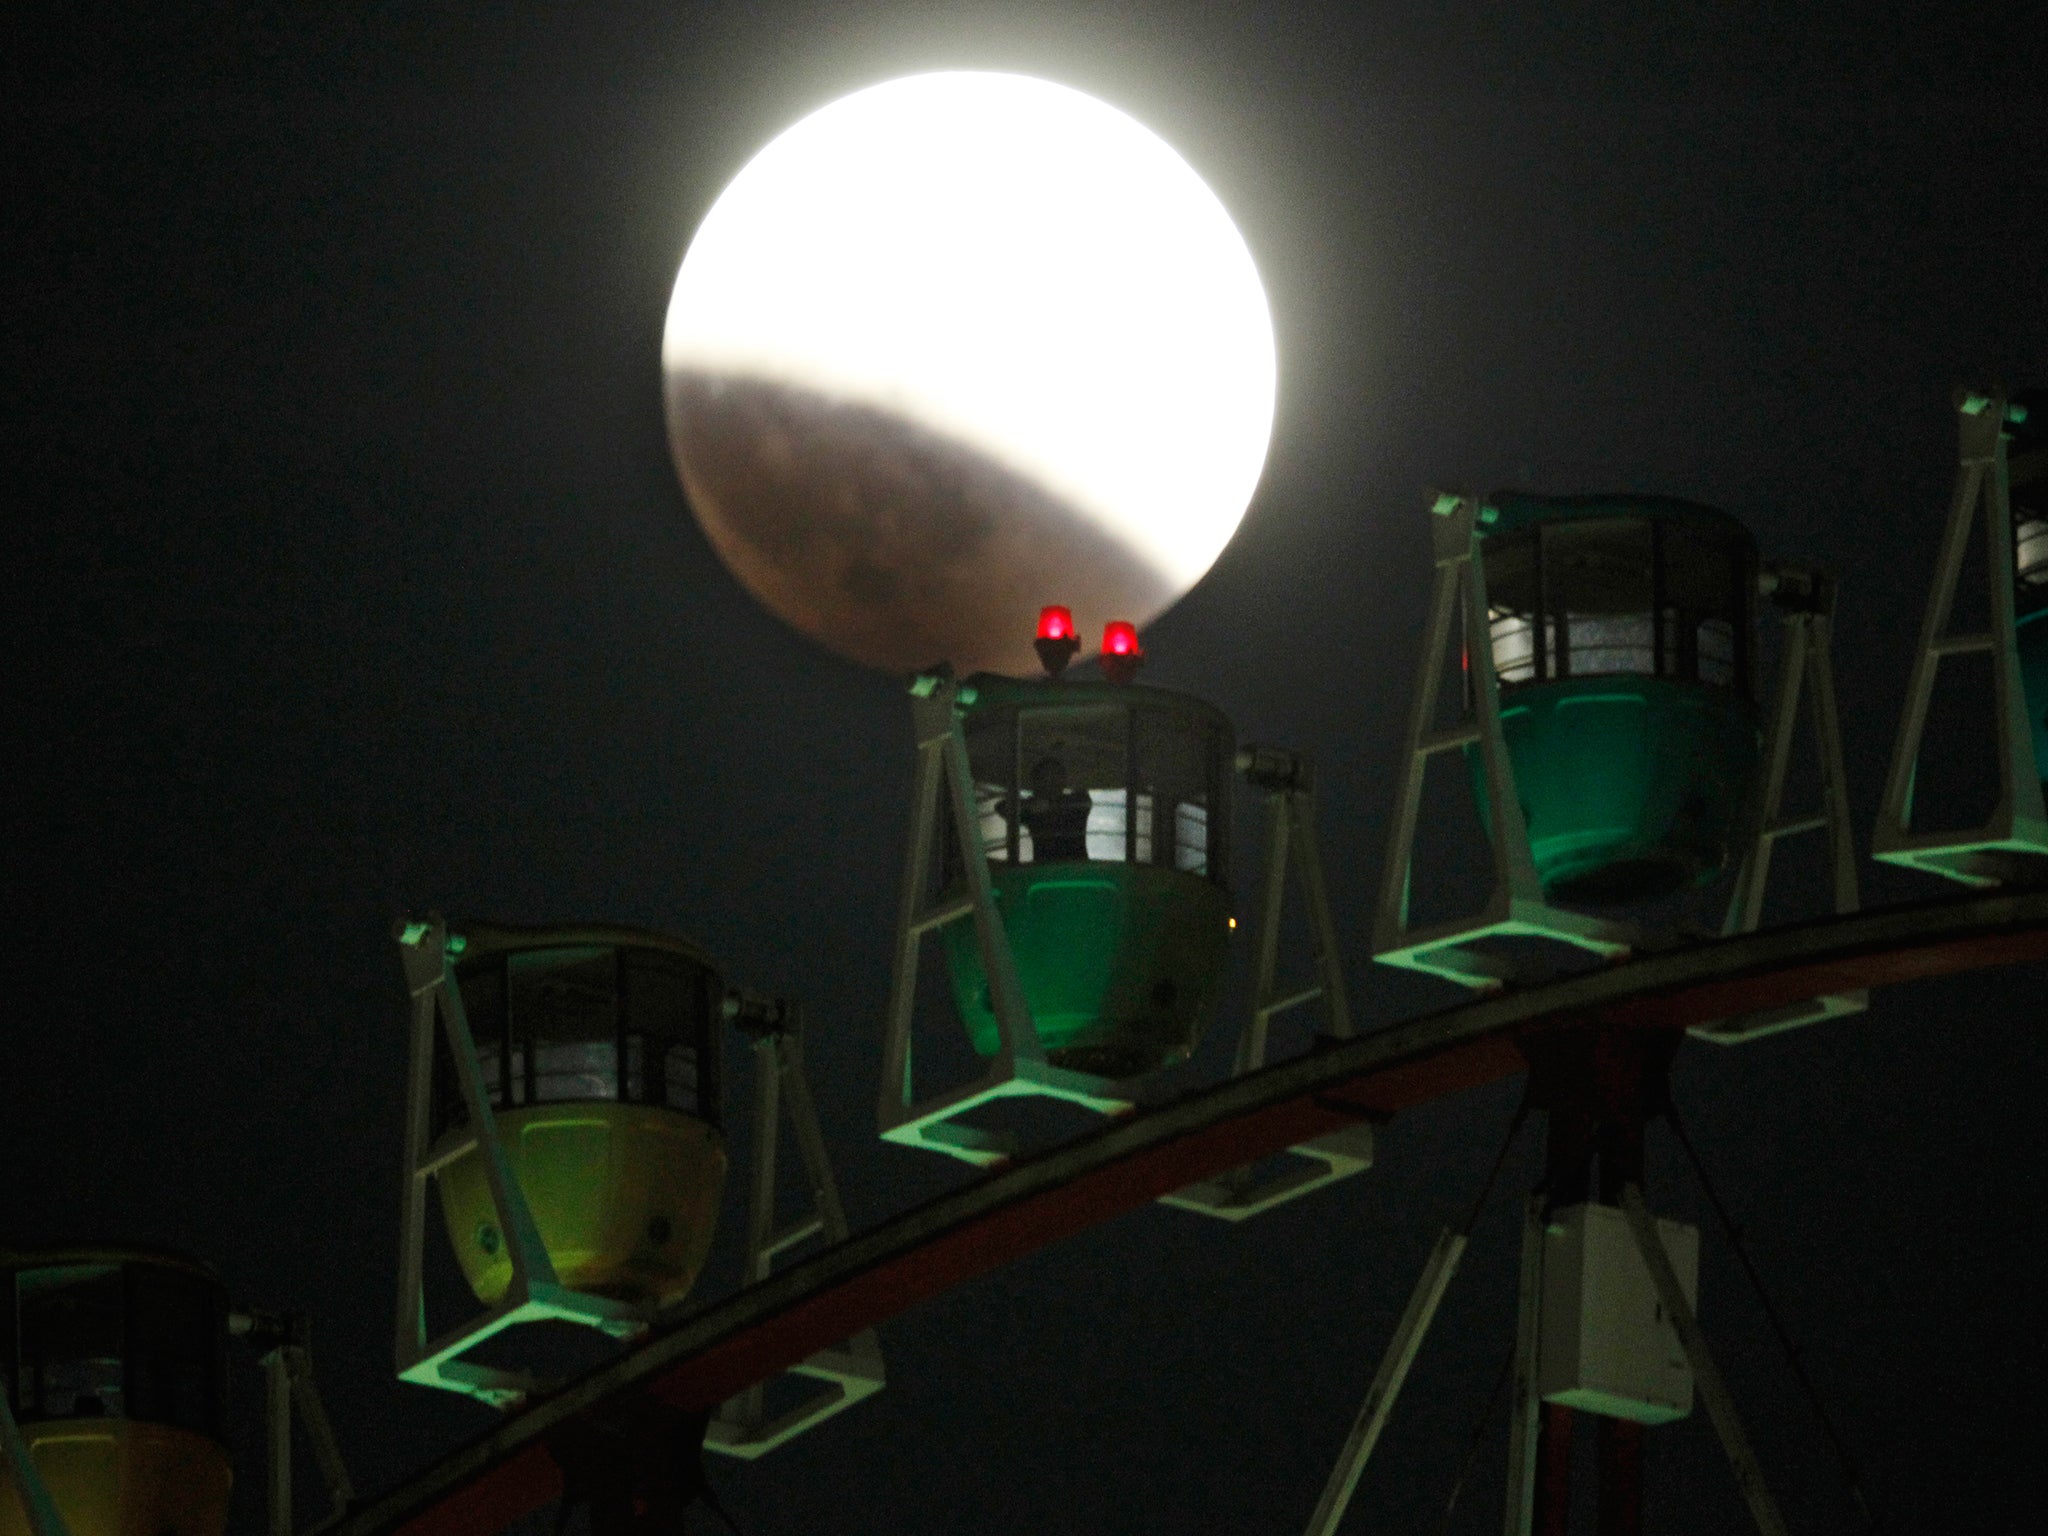 The Earth's shadow renders the moon as a person in Ferris wheel observes it during a total lunar eclipse in Tokyo